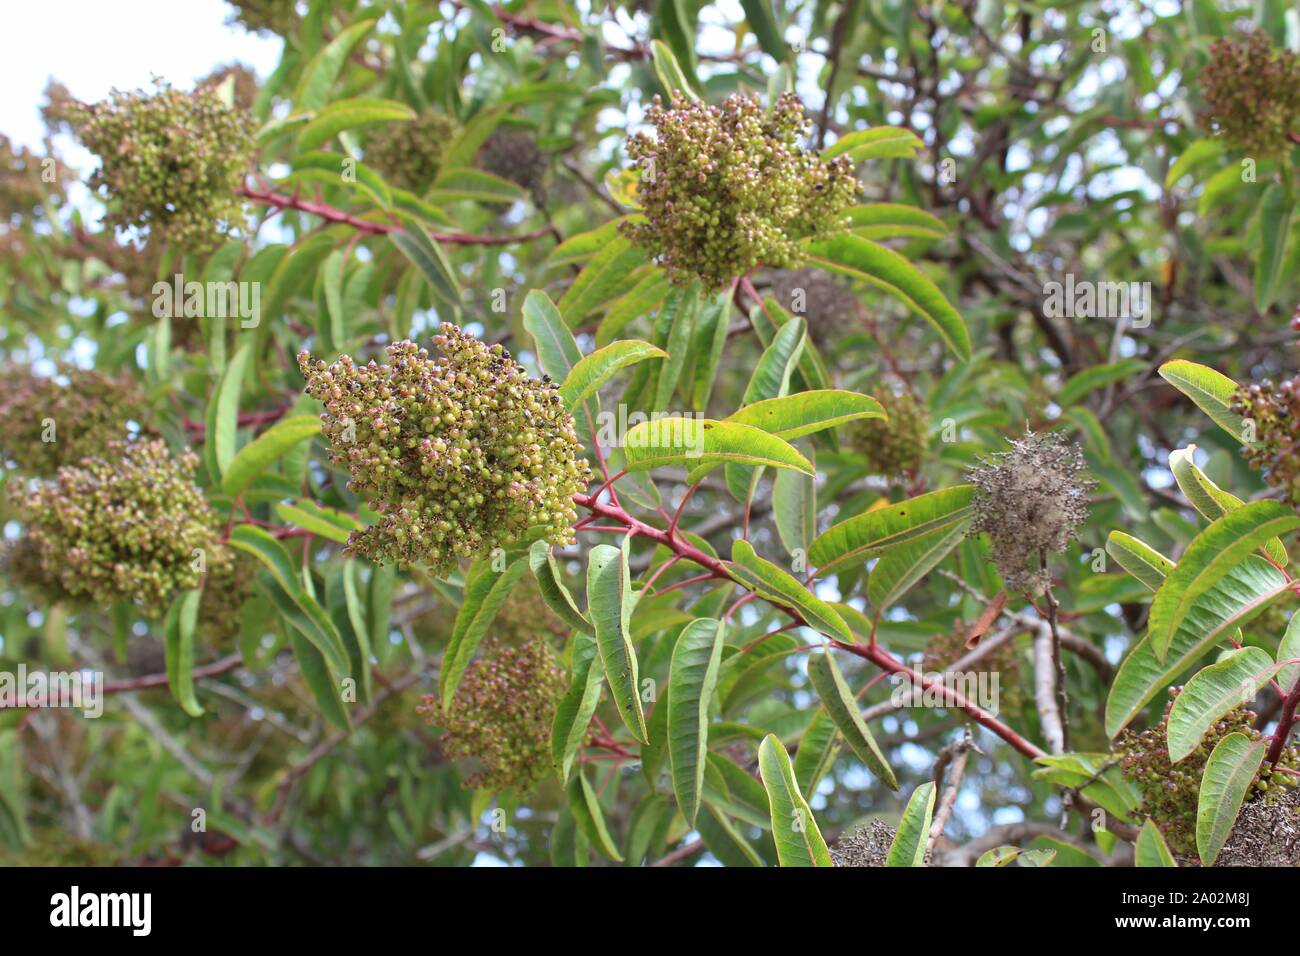 Commonly as Laurel Sumac, and botanically as Malosma Laurina, this Southern California native plant grows in Ballona Freshwater Marsh of Los Angeles. Stock Photo